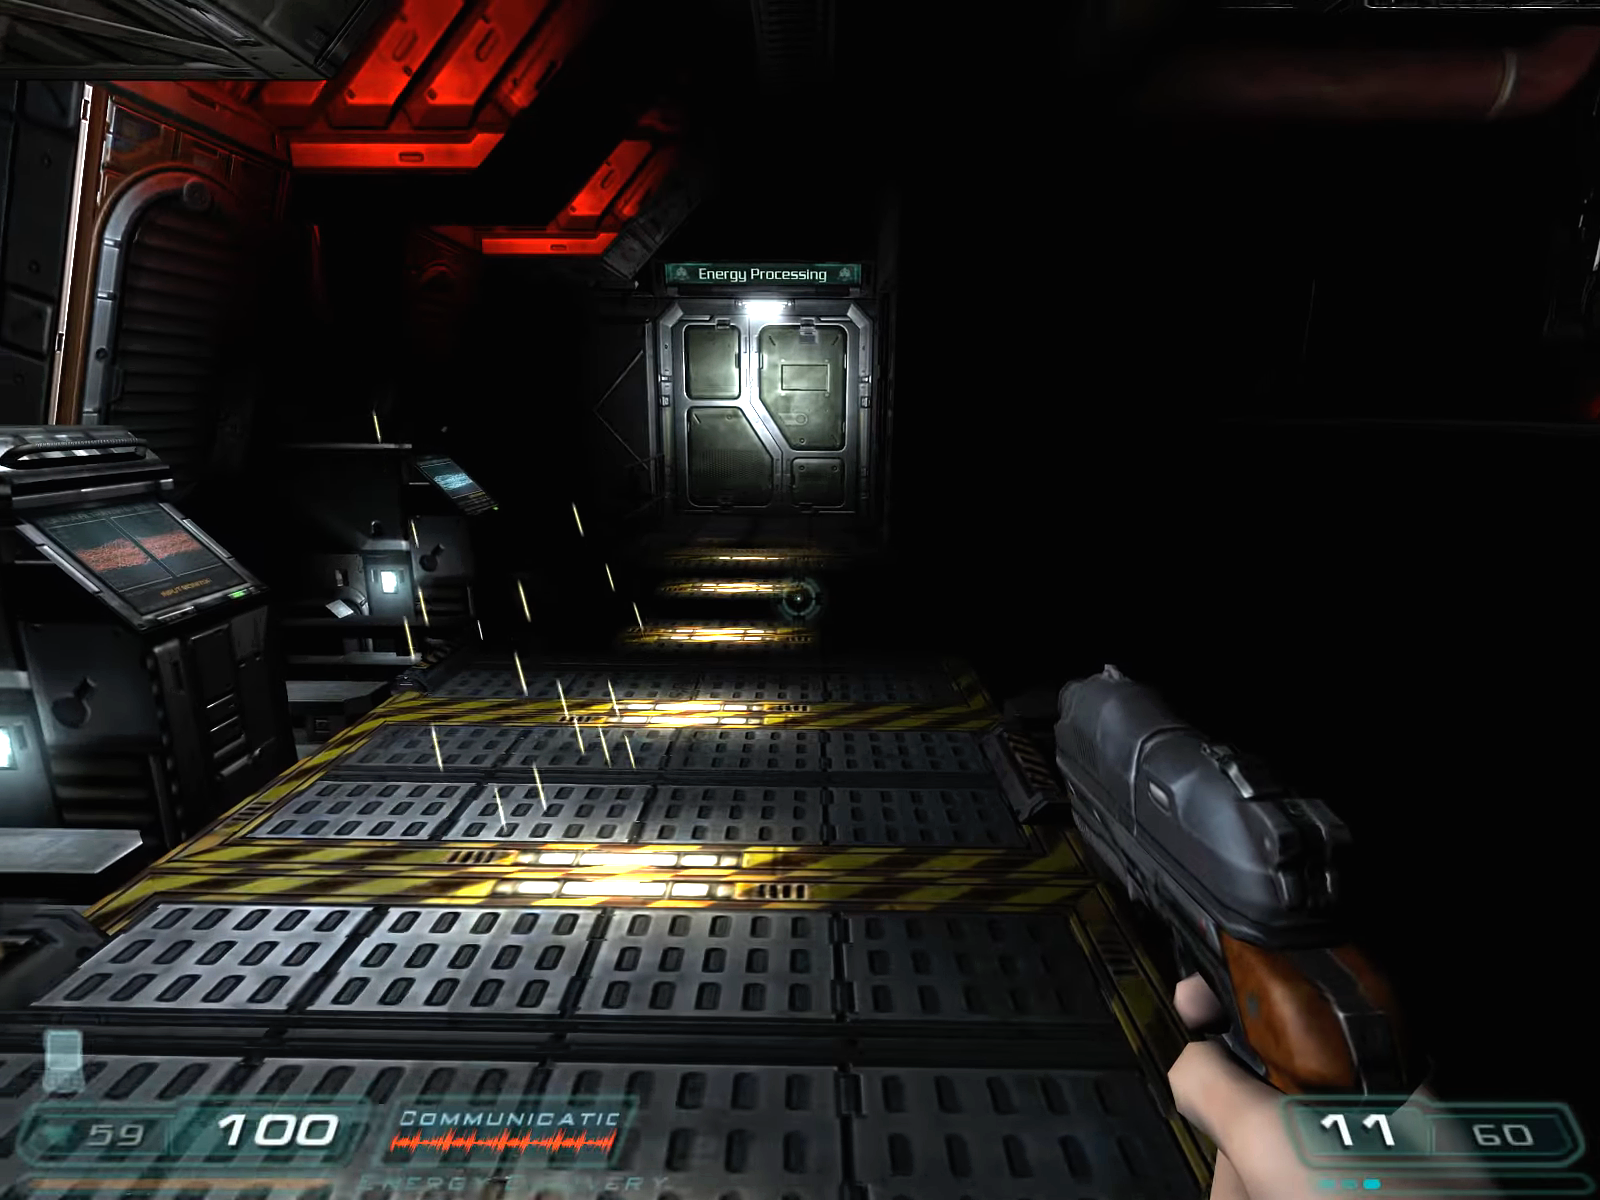 Media asset in full size related to 3dfxzone.it news item entitled as follows: YouTube Gameplay Footage: DOOM 3 | 1080p | 8x AA & 16x Aniso | Image Name: news34452_Doom-3_Screenshot_2.png